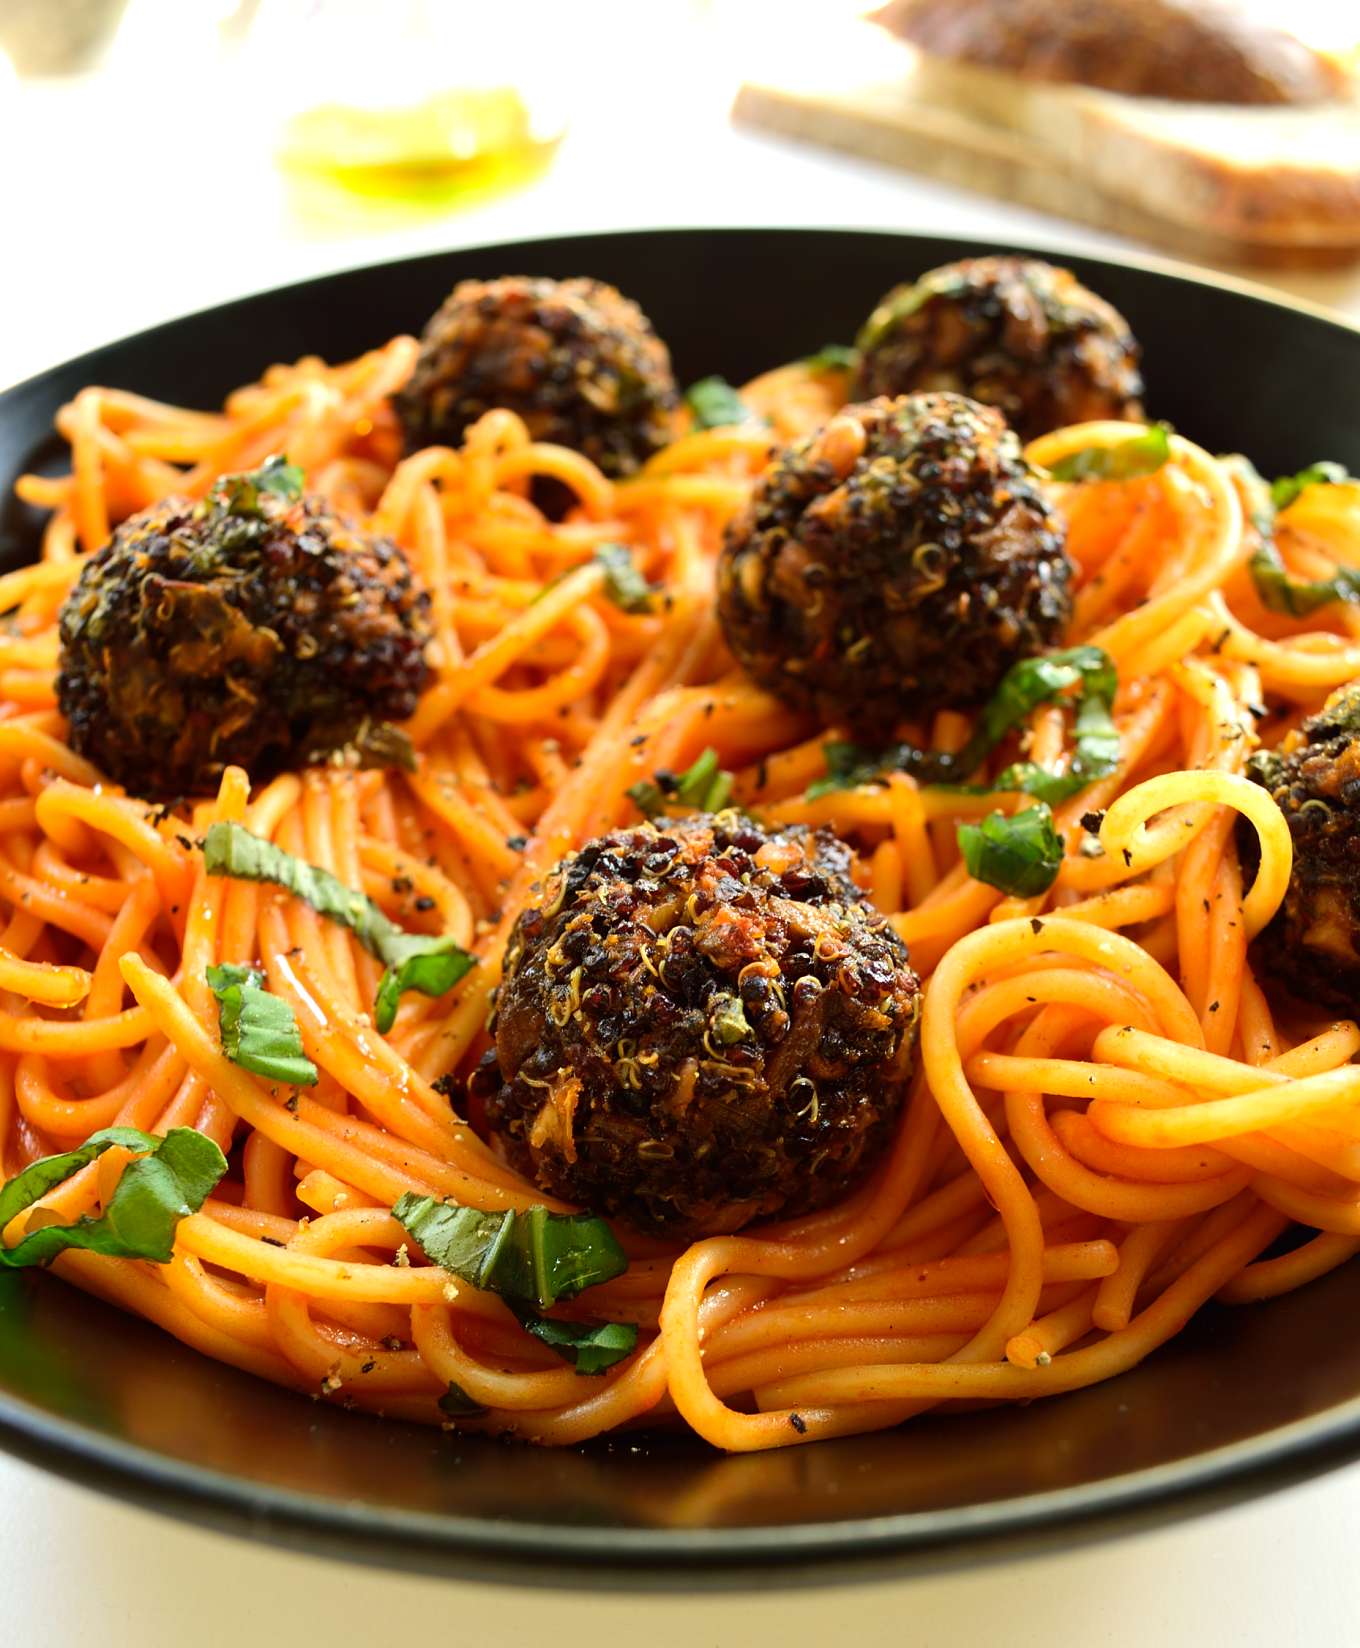 Spaghetti with quinoa meatballs is a hearty, satisfying dish. These vegan meatballs are super easy to make and are baked to make them light and healthy.